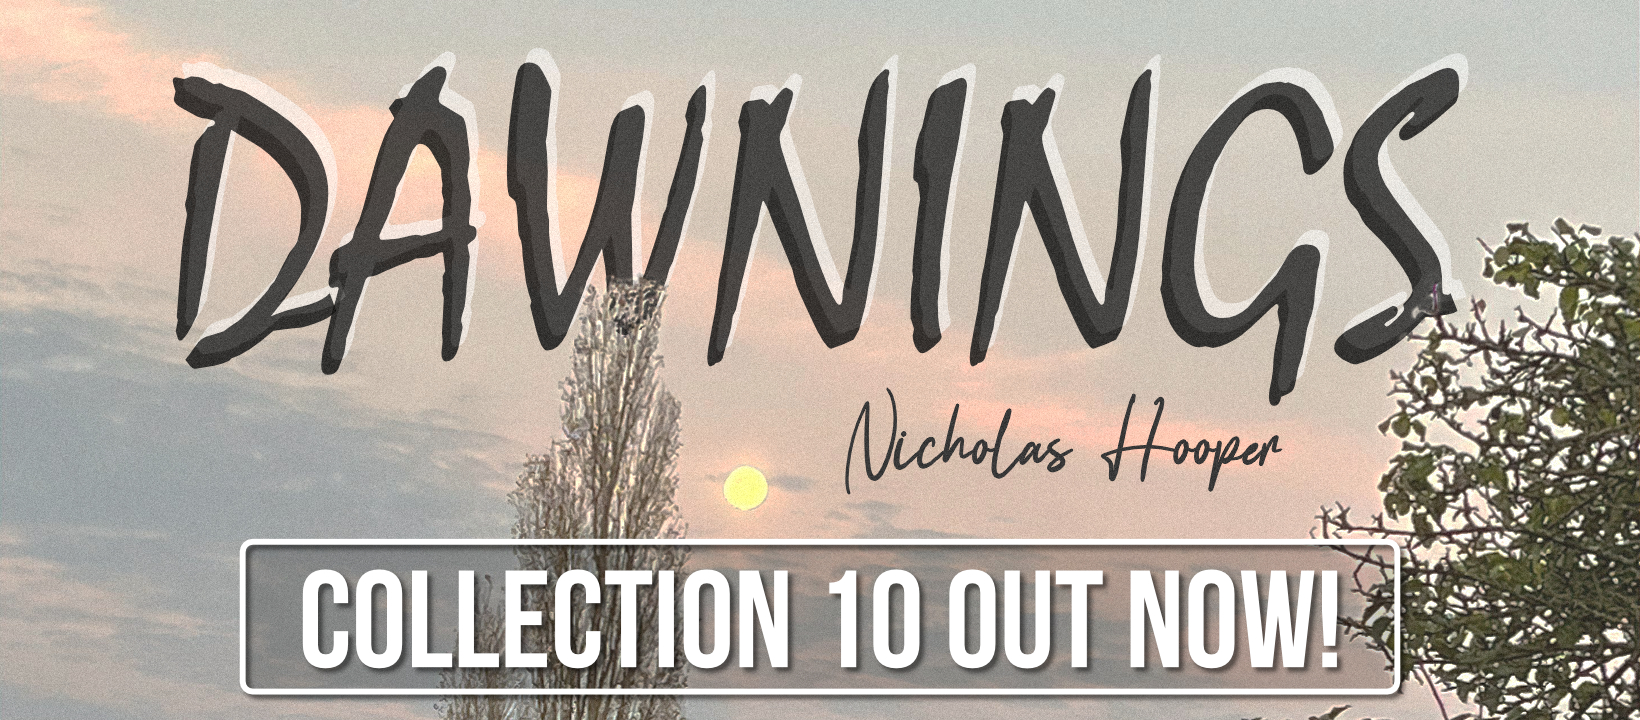 Dawnings, by Nicholas Hooper. New Collection Out Now!